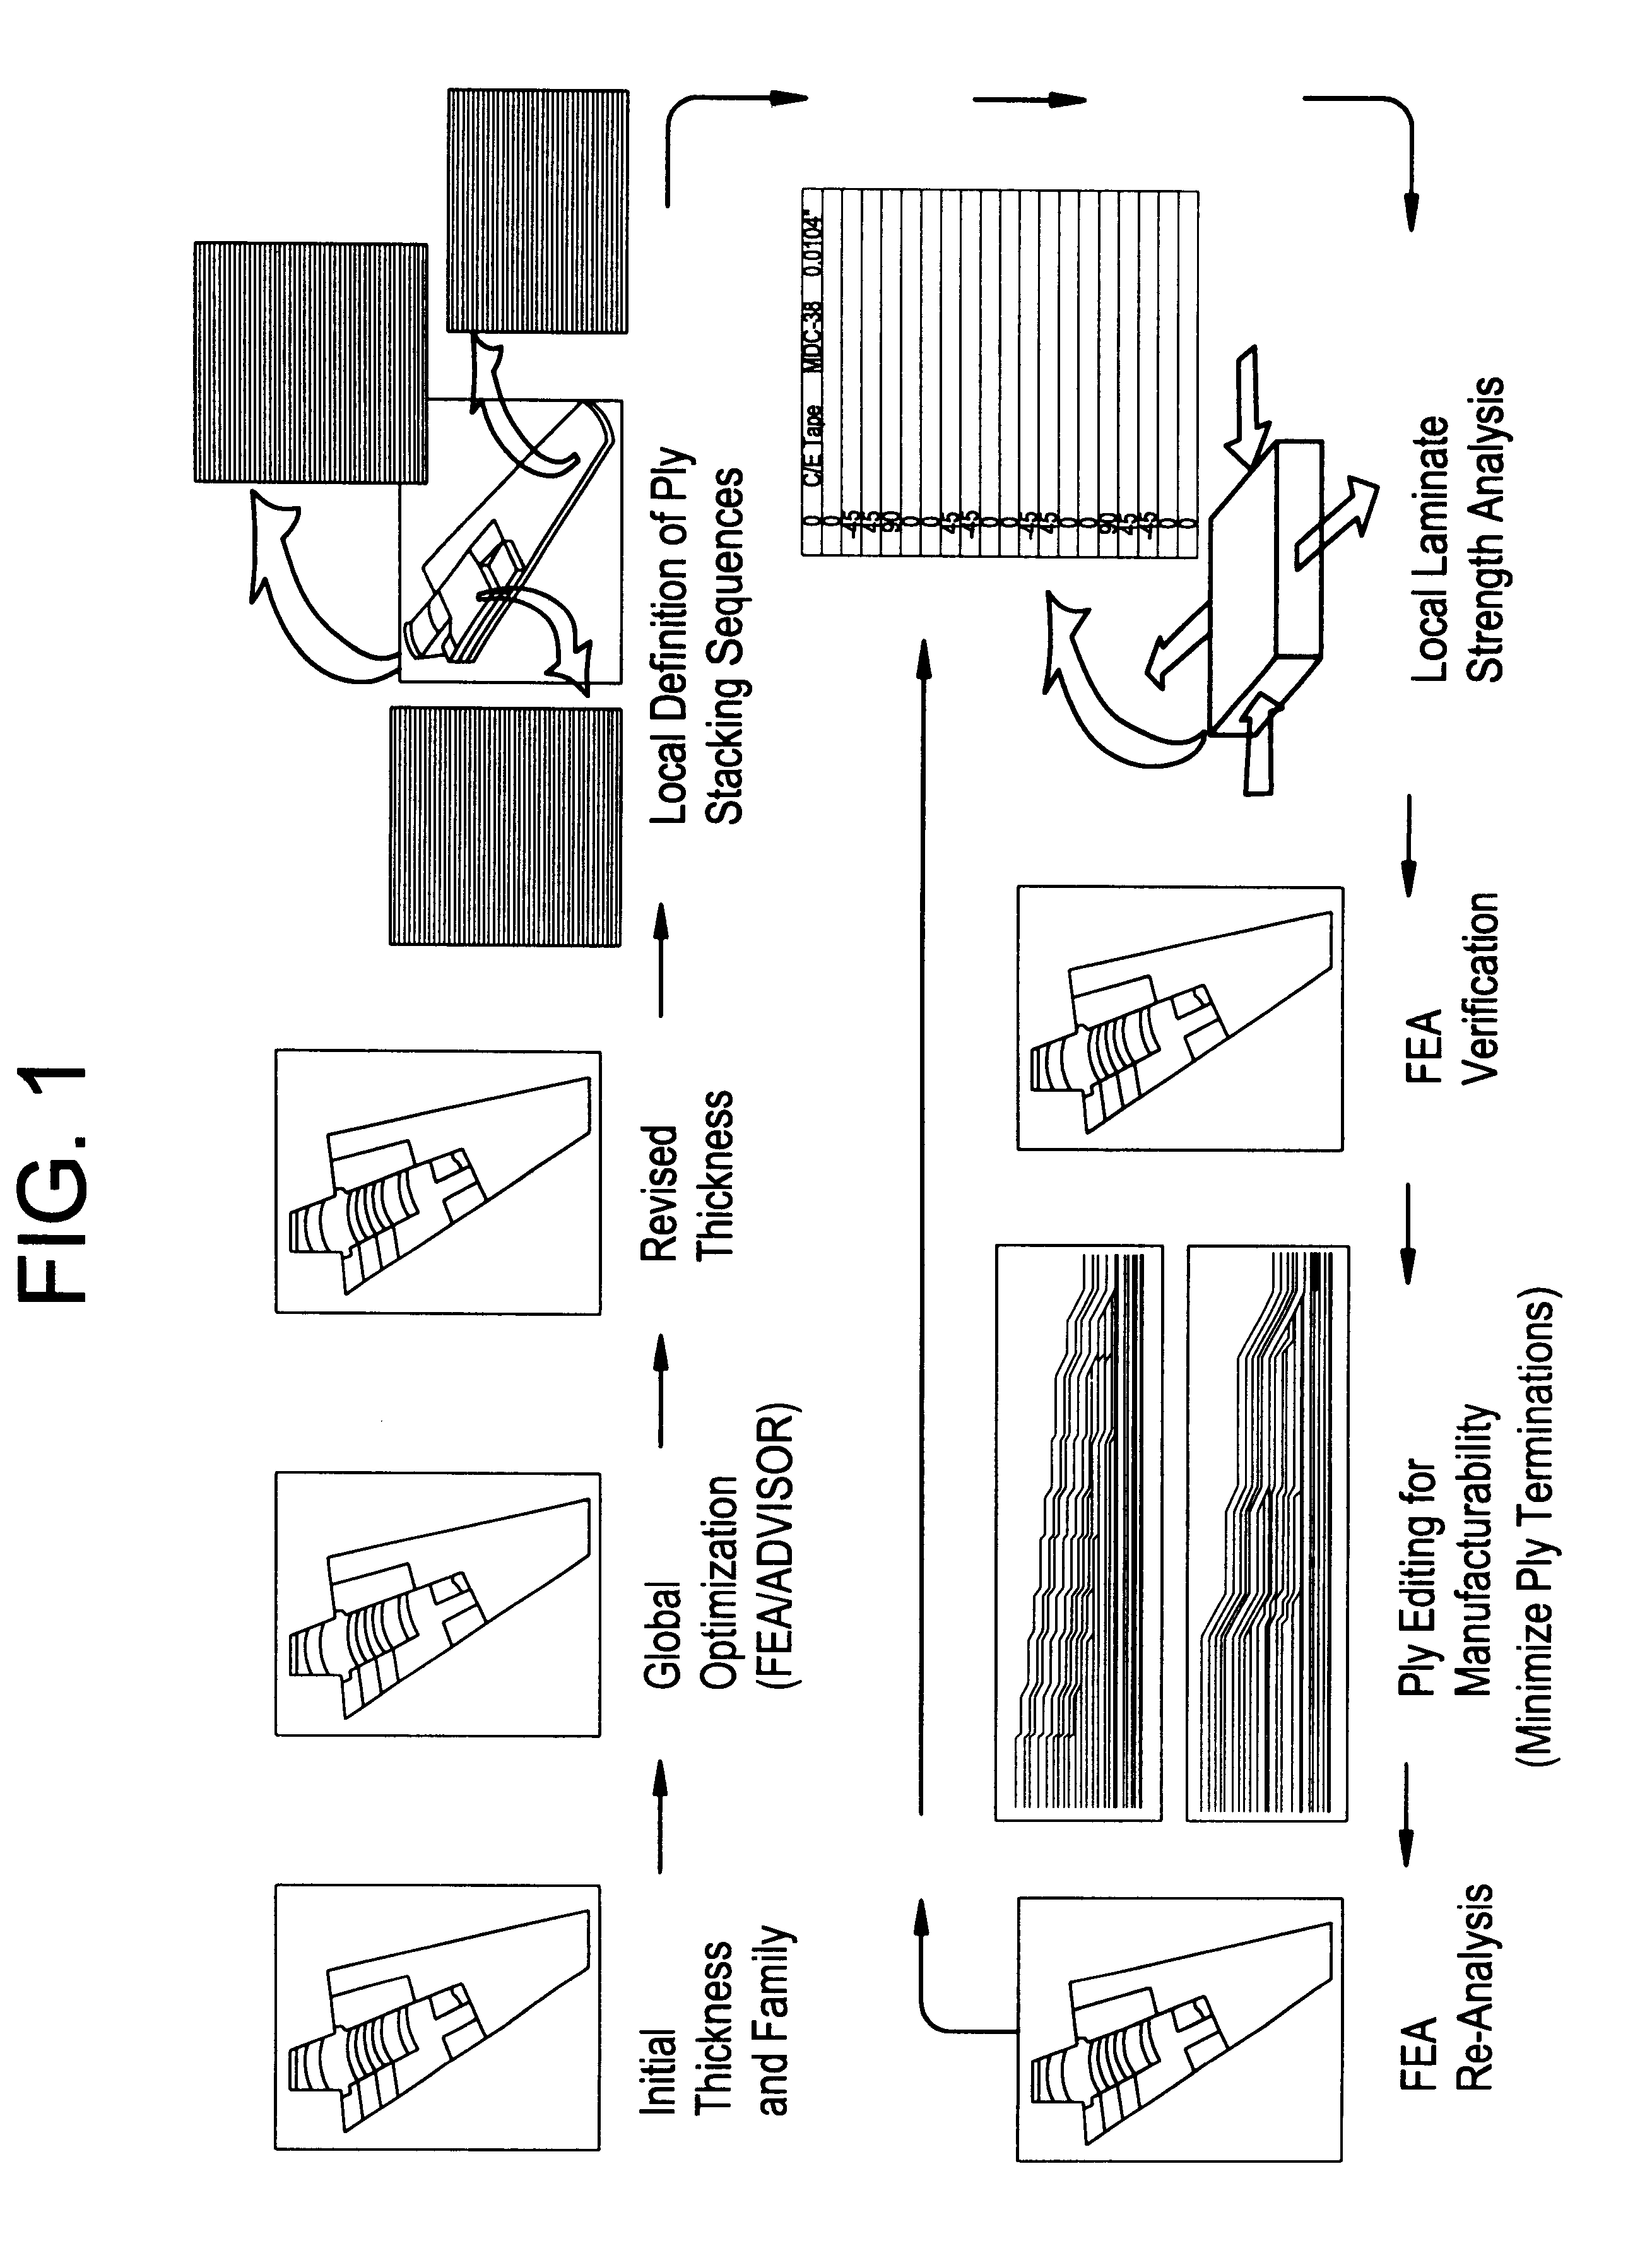 Knowledge driven composite design optimization process and system therefor